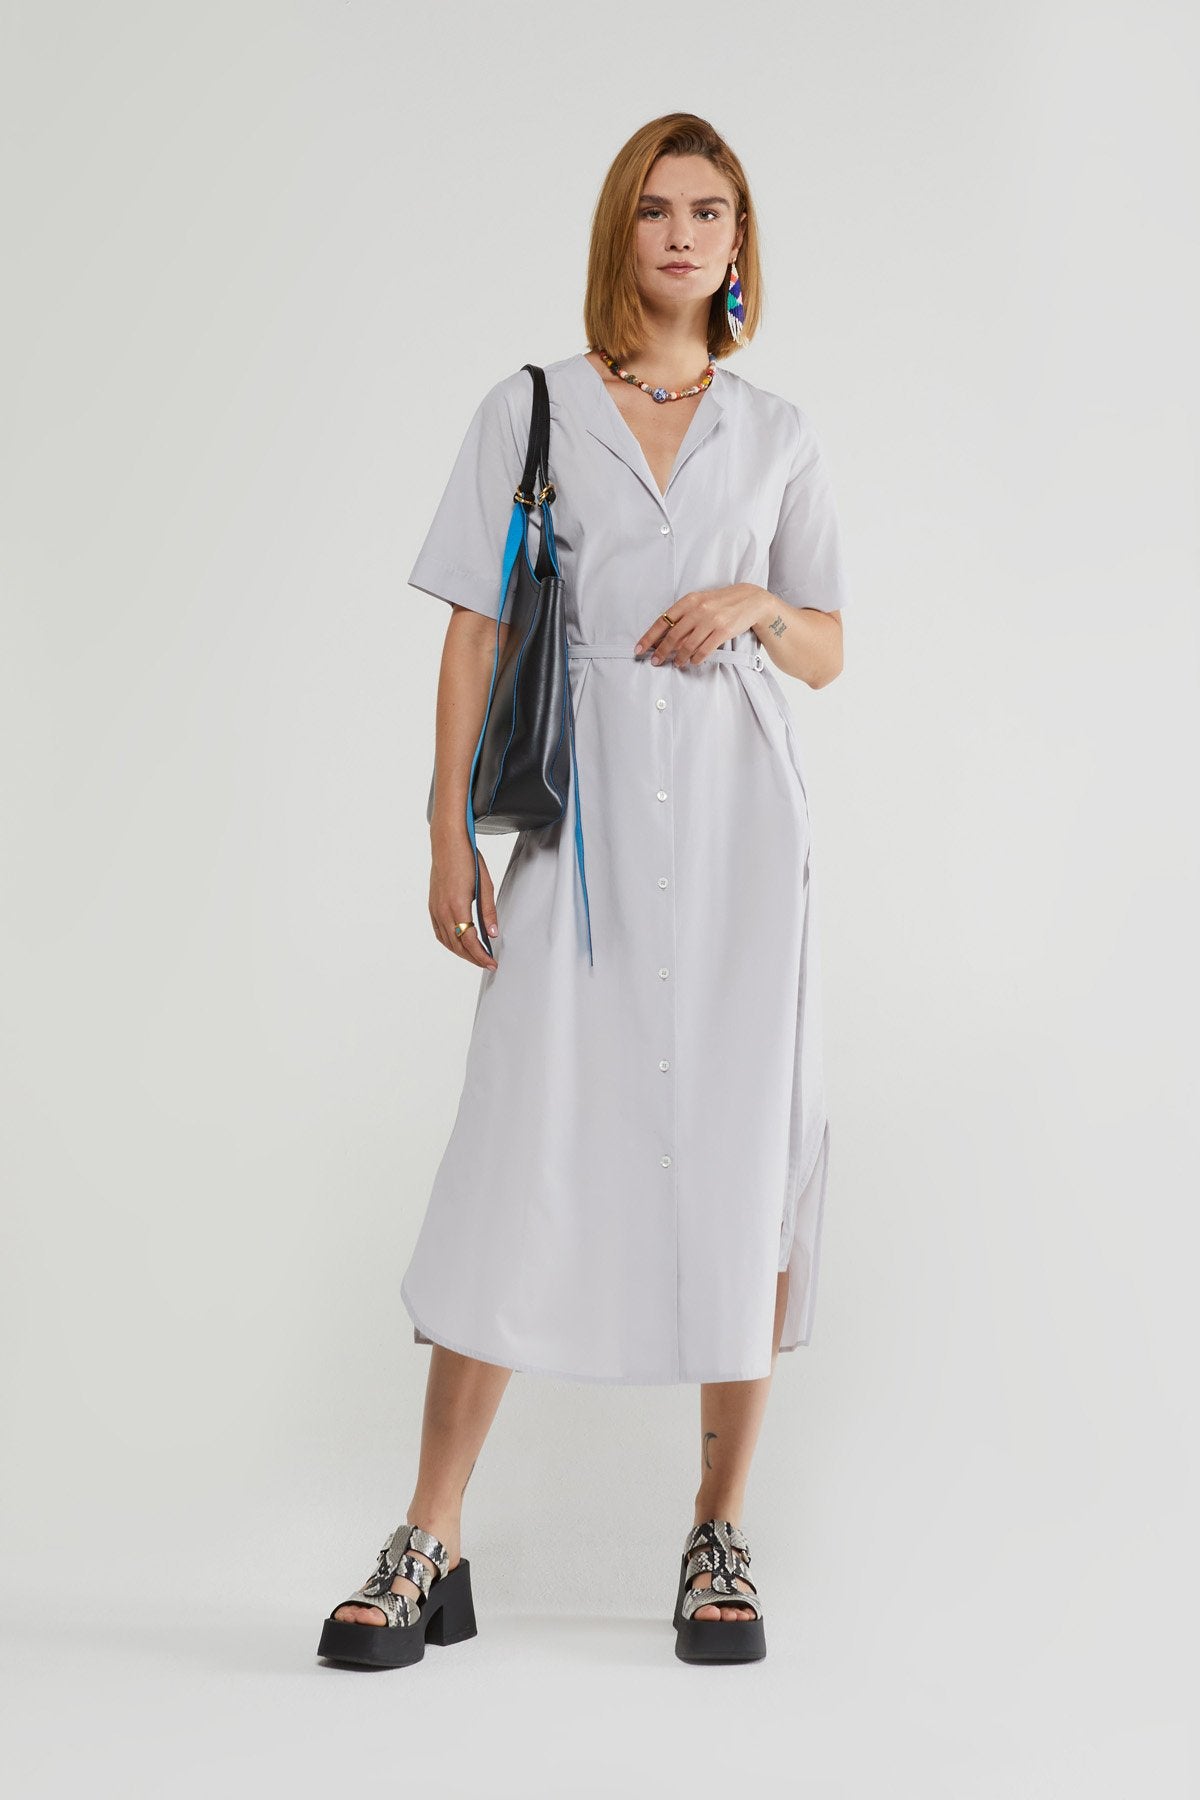 Poplin Long Dress with Sash in black by Ottod'ame